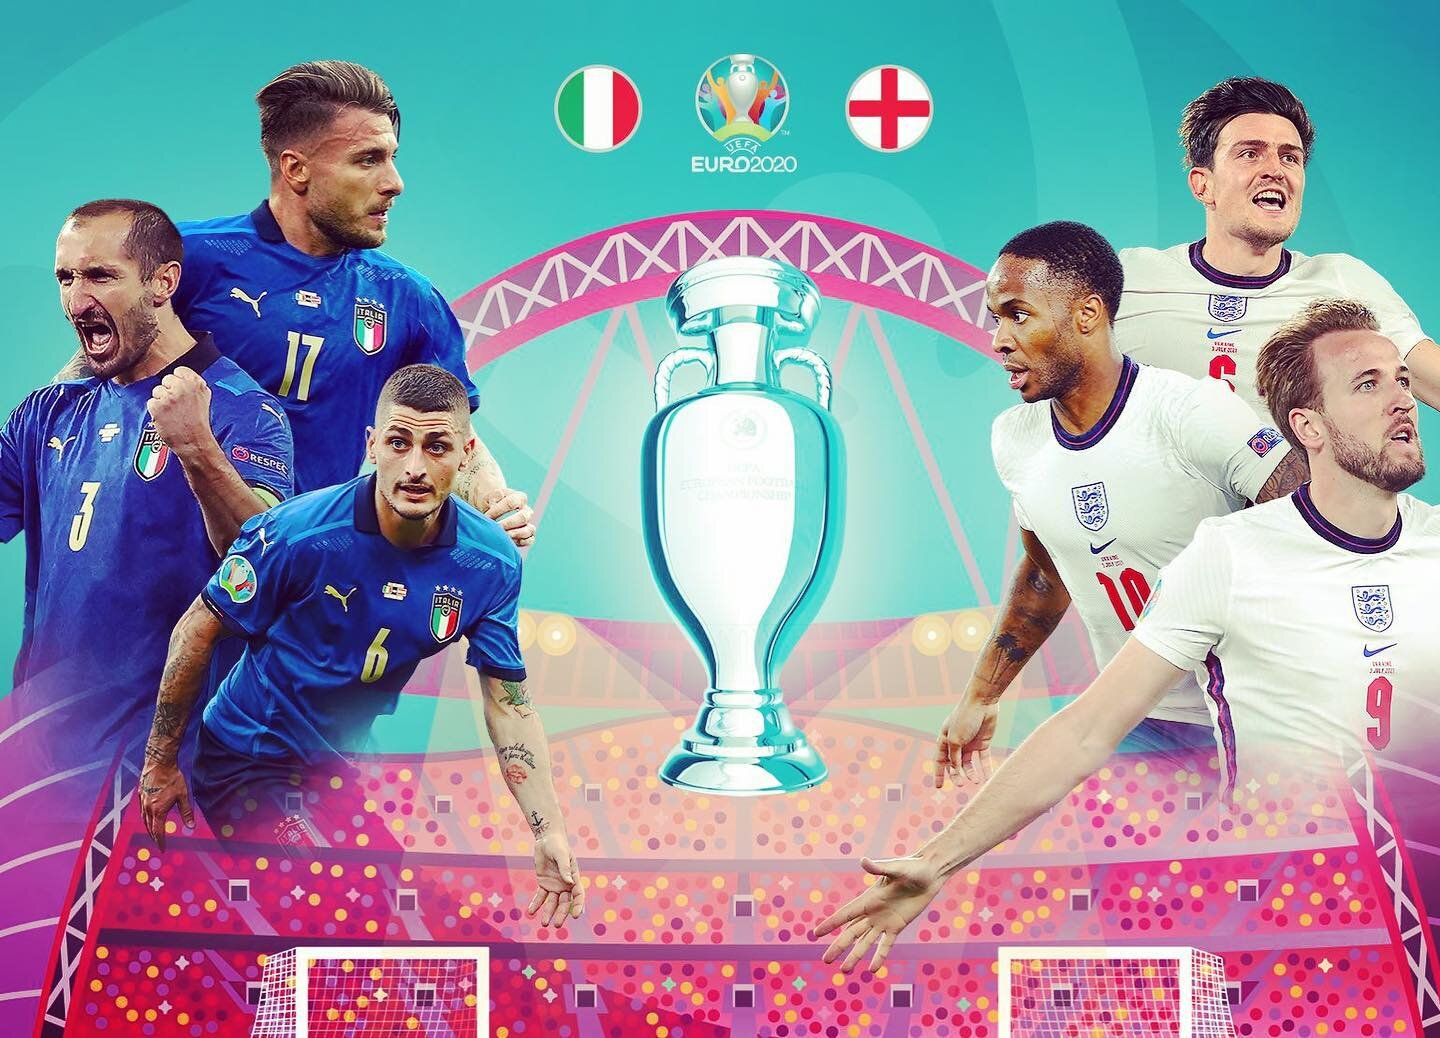 Open at 11:30AM on Saturday 7/11 for UEFA finals England vs Italy!!